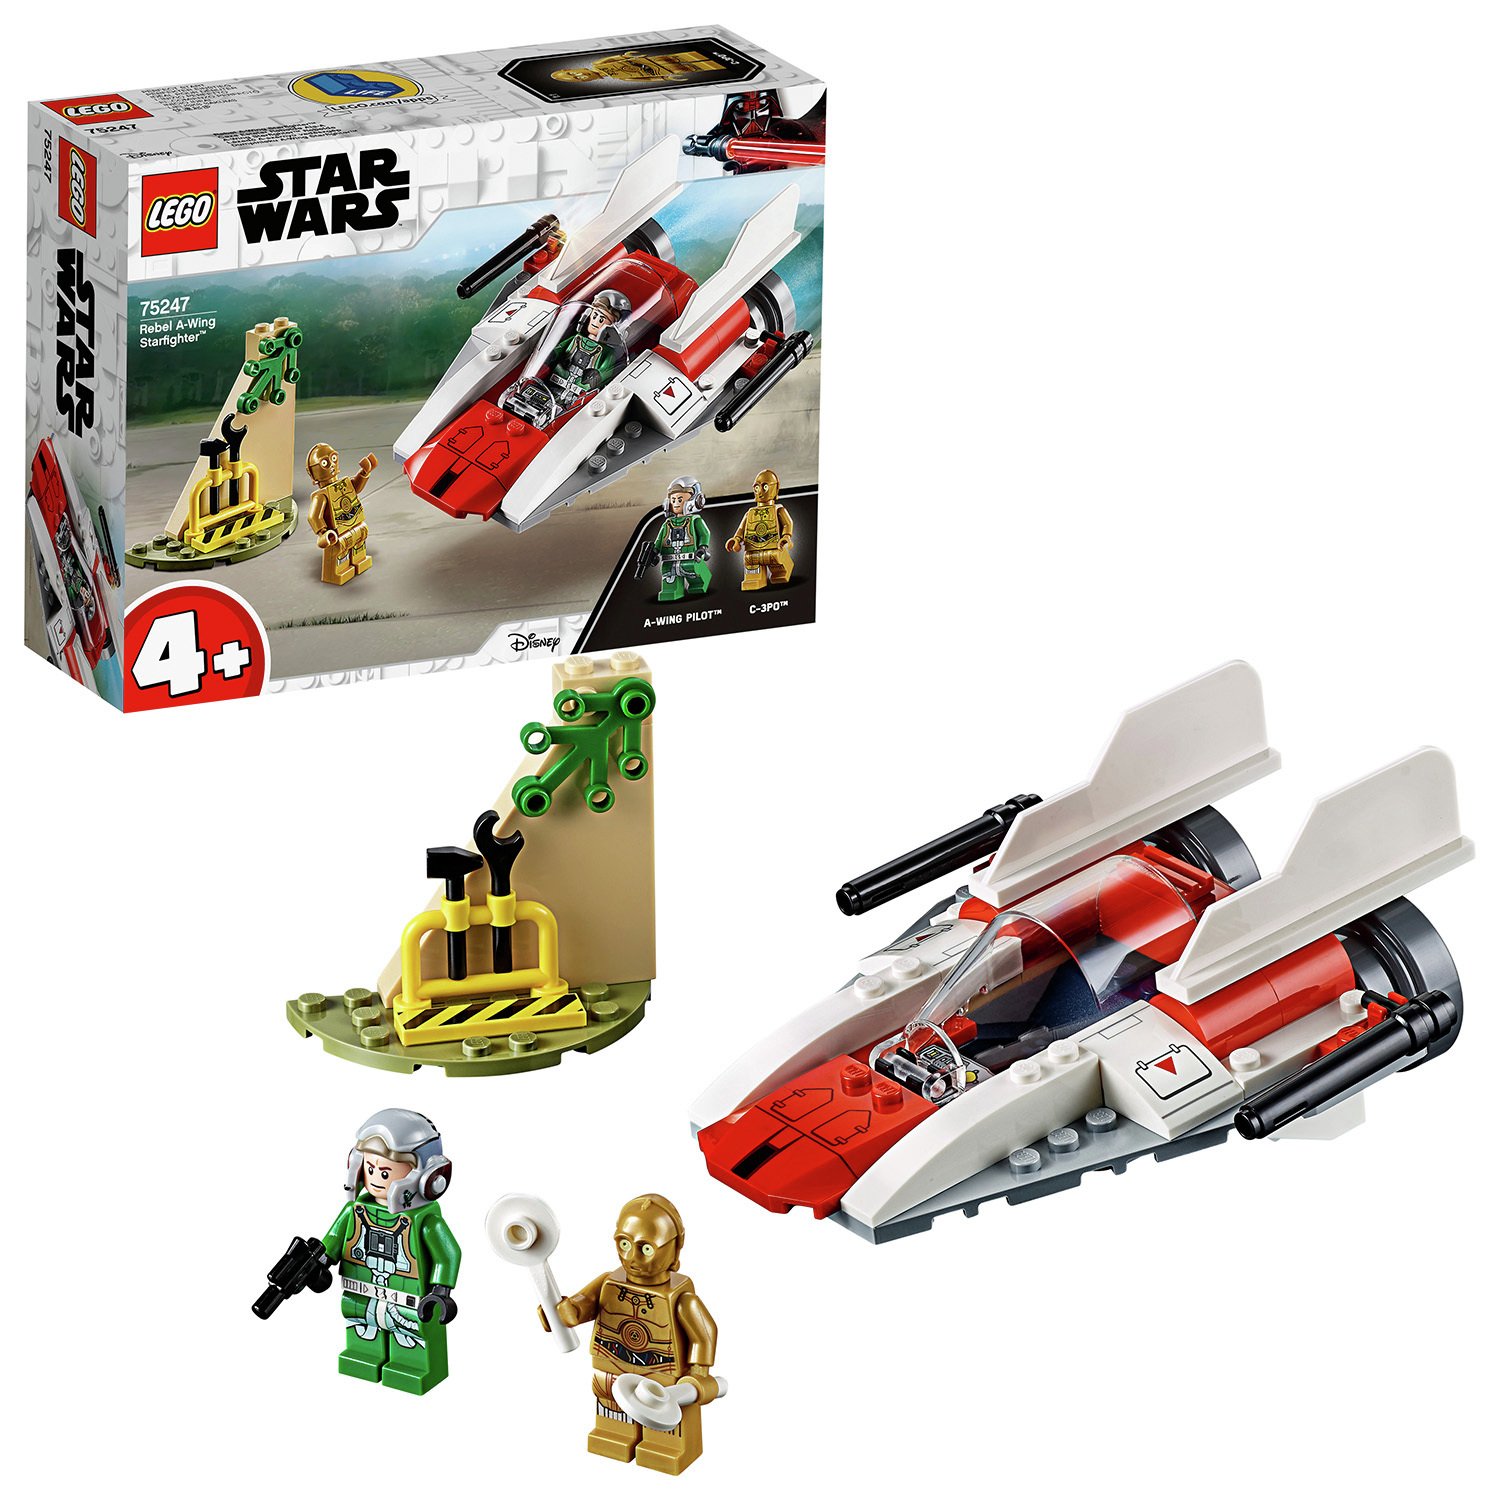 LEGO Star Wars Rebel A-Wing Starfighter Toy - 75247